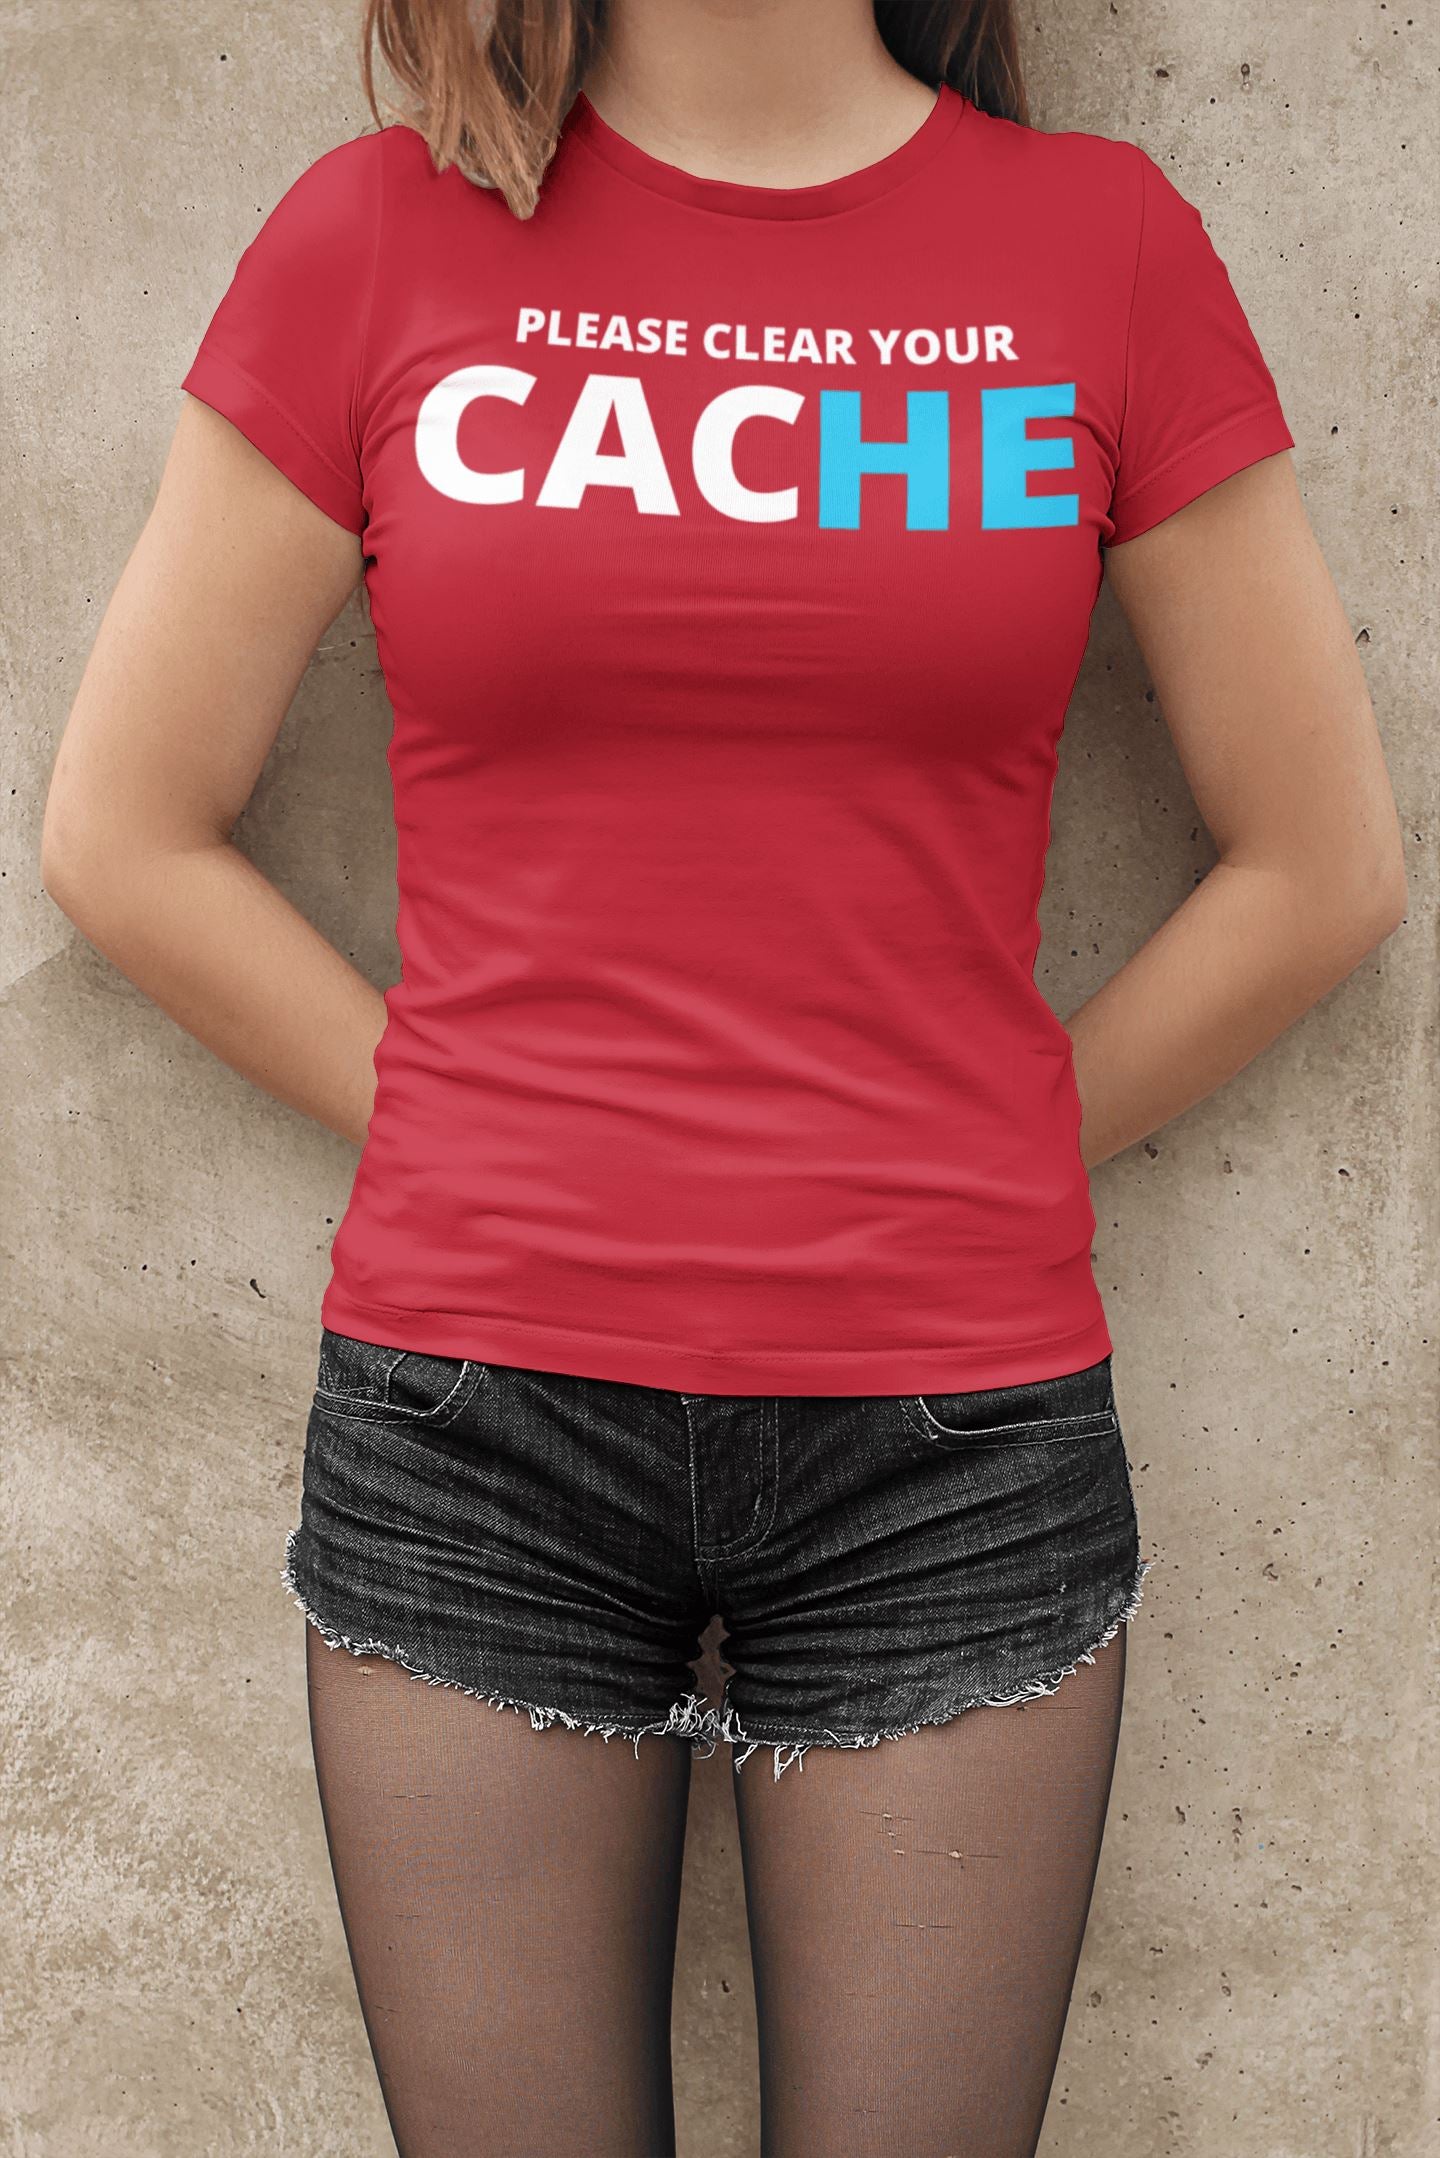 Please Clear Your Cache Exclusive T Shirt for Men and Women - Catch My Drift India Shirts & Tops black, clothing, computer science, engineer, engineering, it, made in india, shirt, t shirt, t